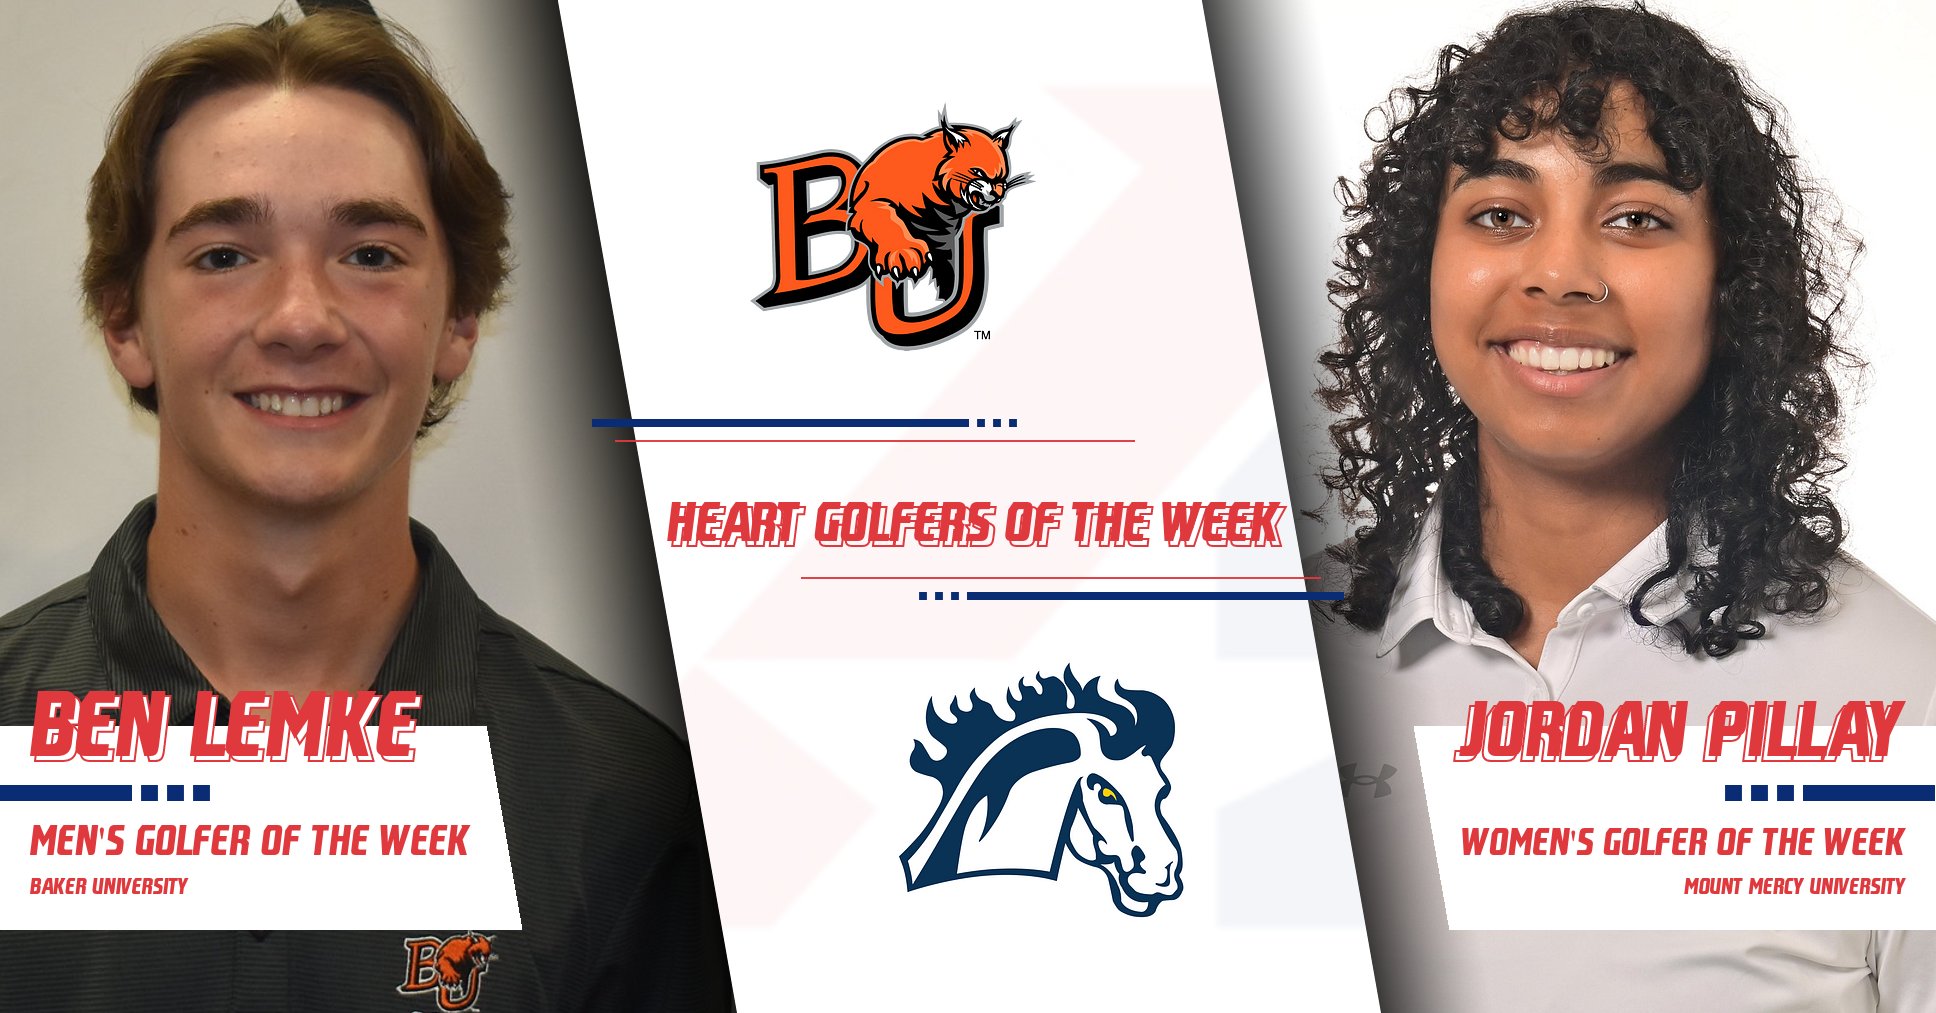 Heart Men&rsquo;s and Women&rsquo;s Golfer Awards of the Week Announced